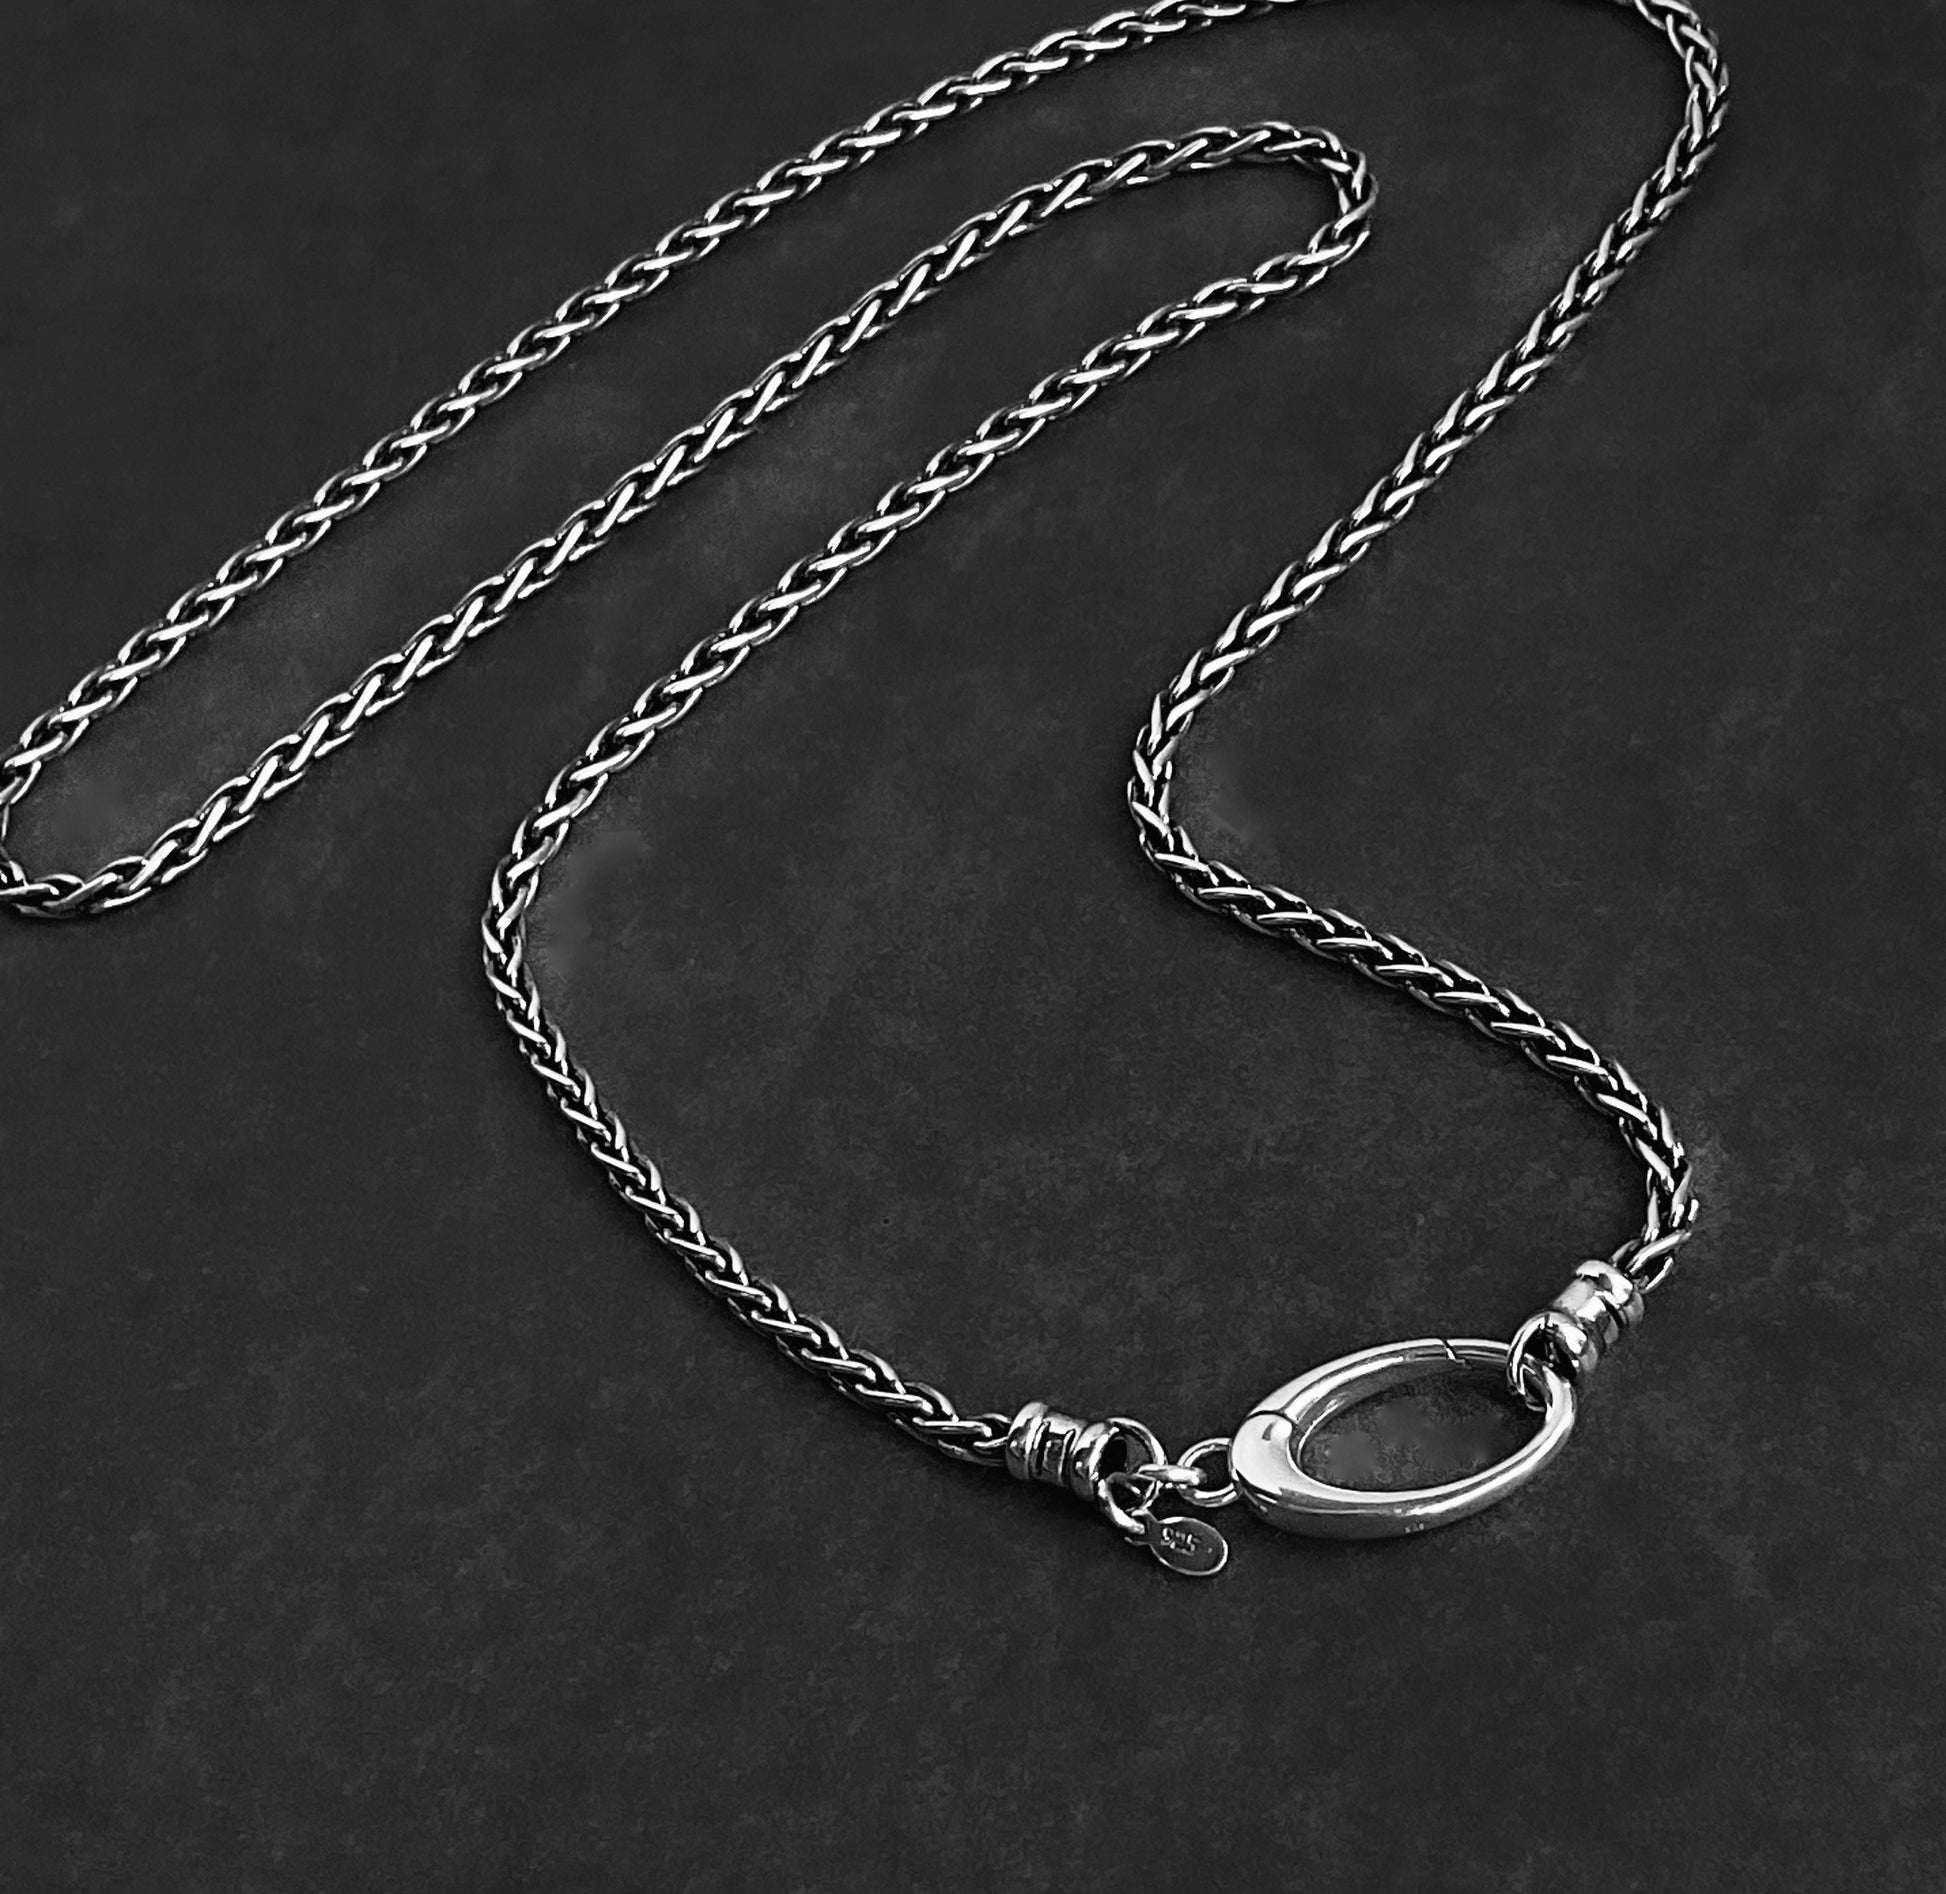 Sterling Silver Wheat Chain With Lobster Clasp, Replacement Chain